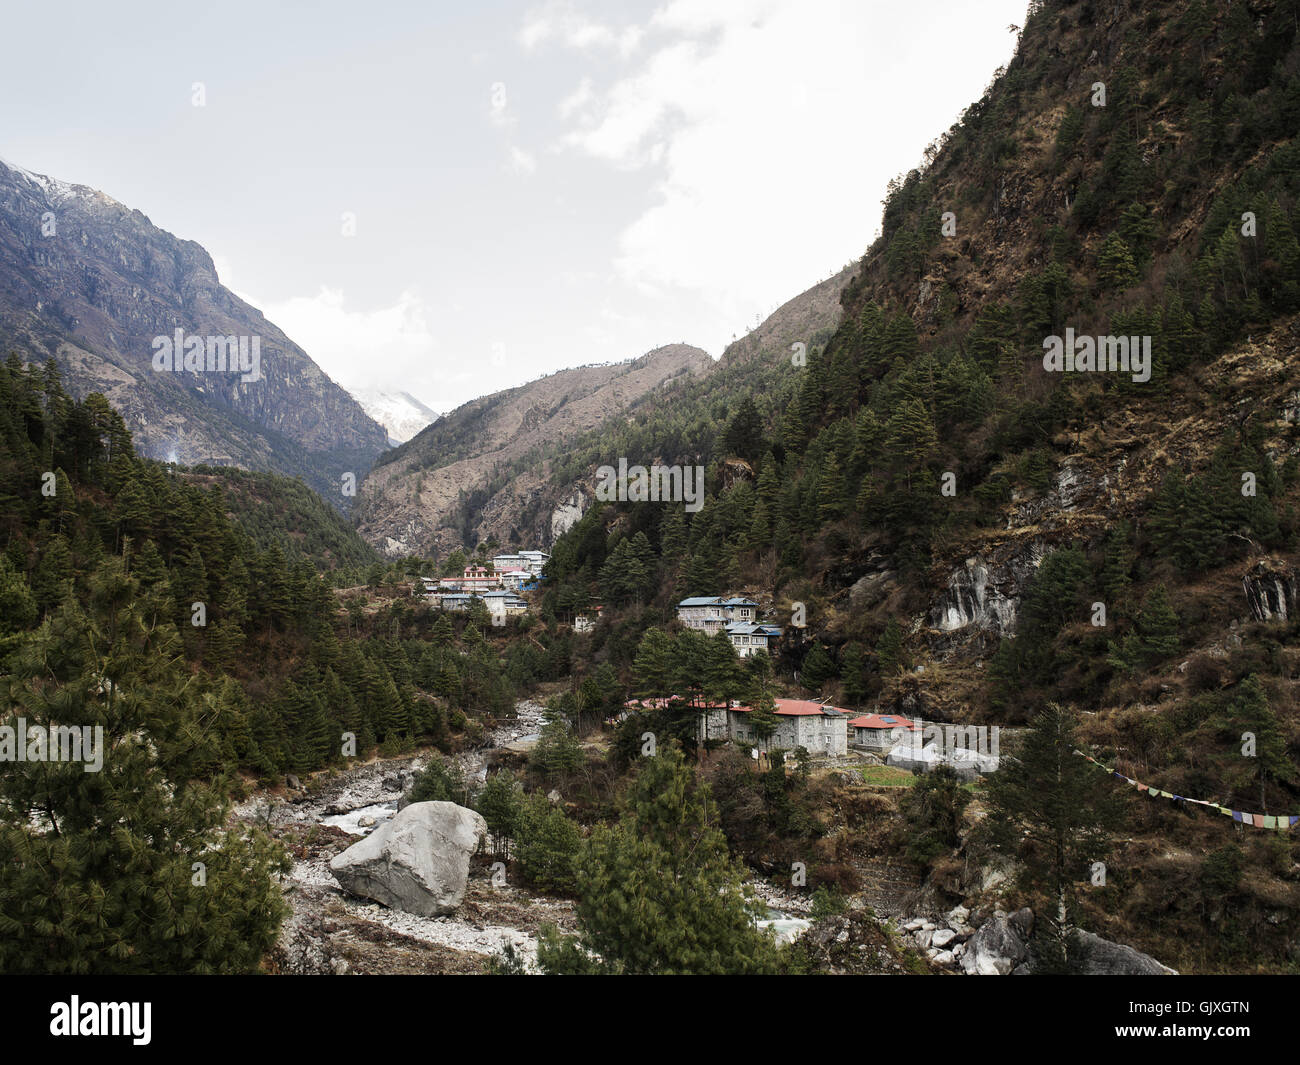 Overlooking the village Phakding, located in Nepal's Himalayas Stock Photo